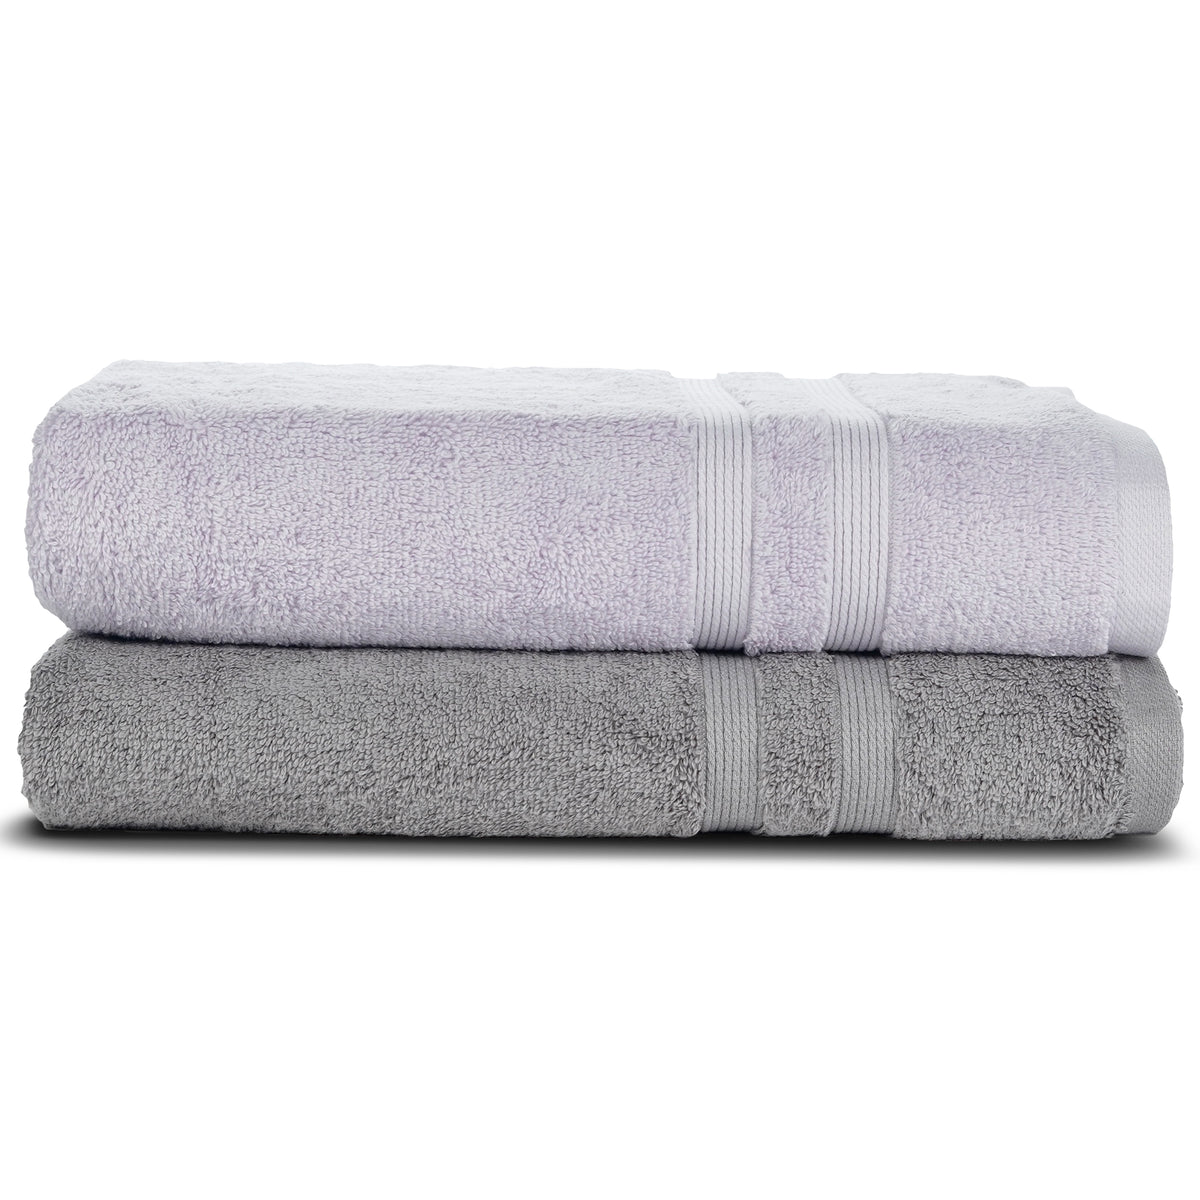 Grey and Lavender Terry Bath Towel 600 GSM